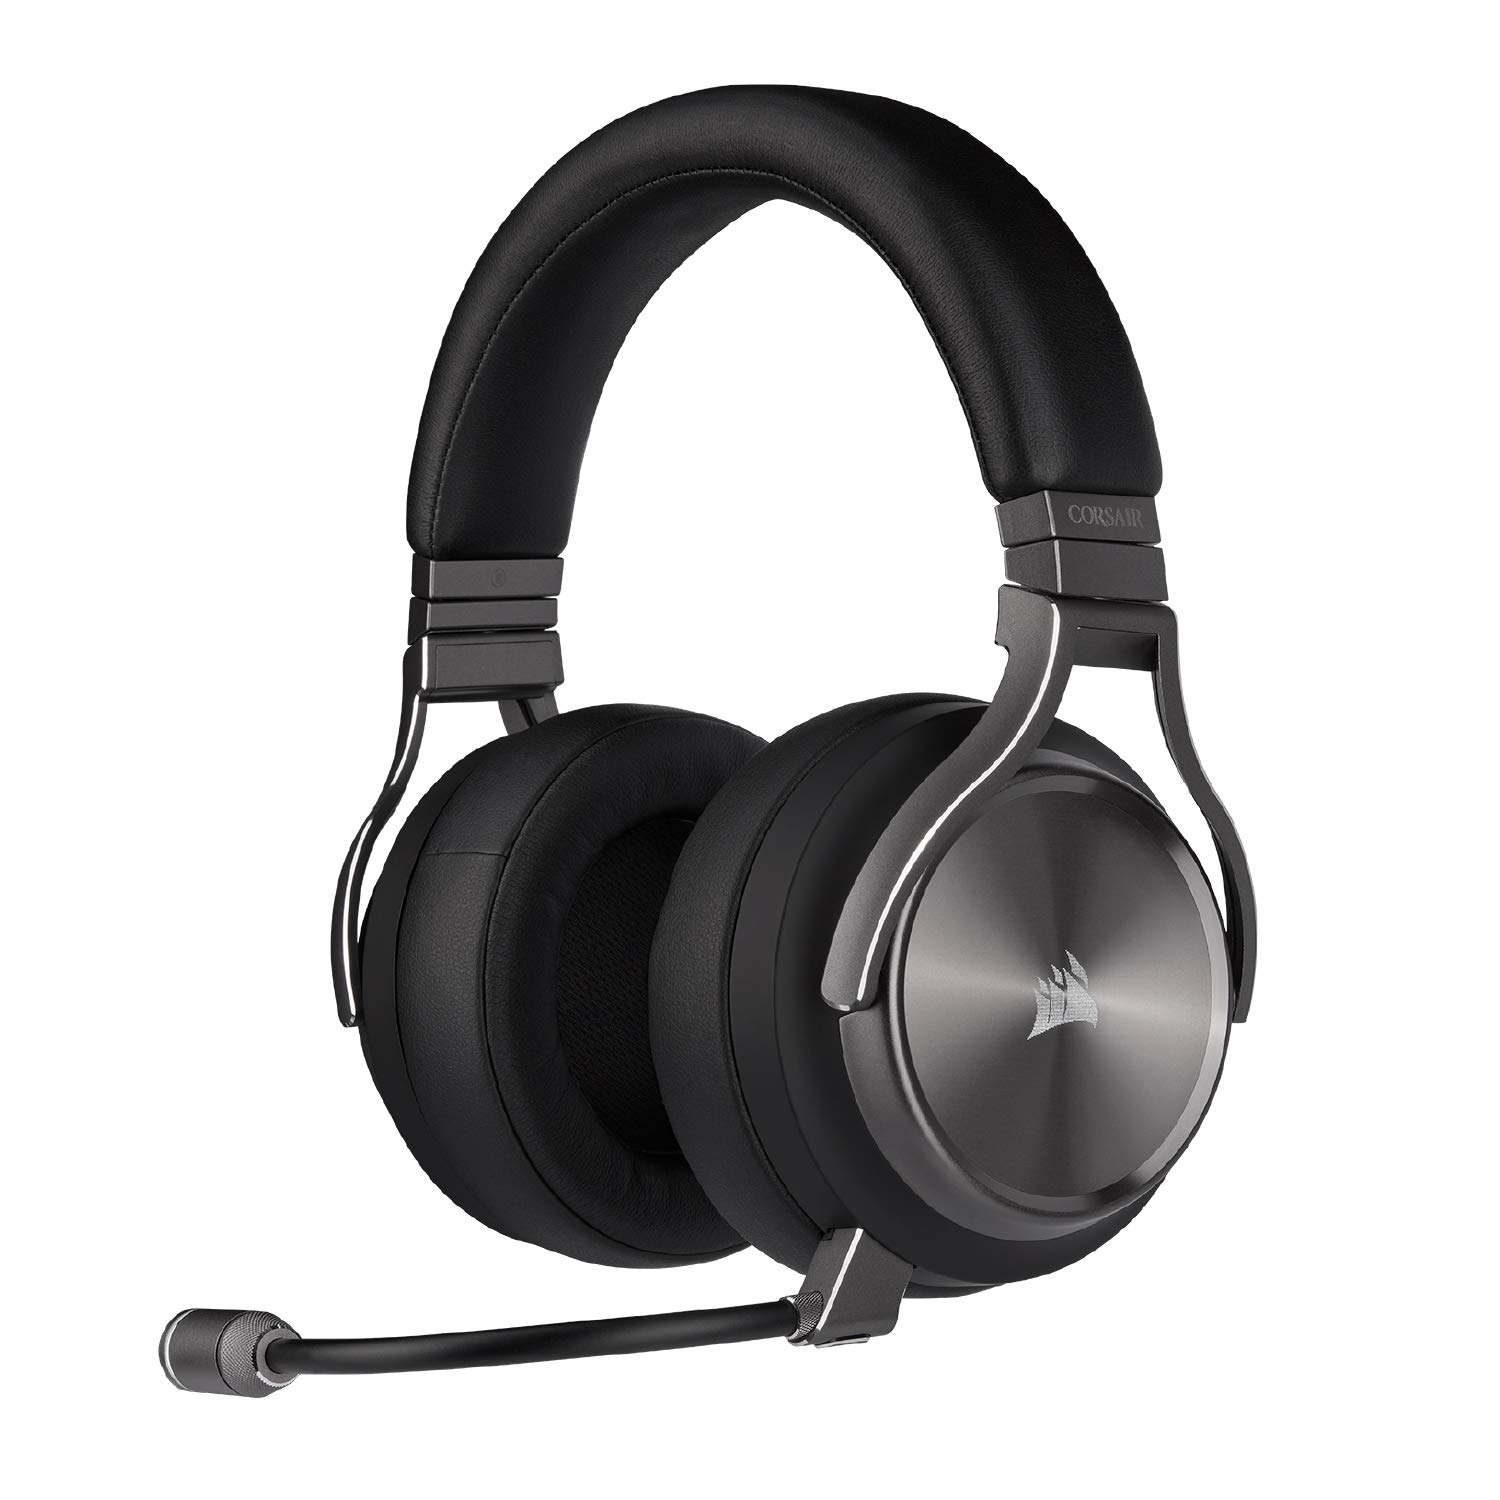 Corsair Virtuoso RGB Wireless SE Gaming Headset - High-Fidelity 7.1 Surround Sound with Broadcast Quality Microphone - Memory Foam Earcups - 20 Hour Battery Life Works w/ PC, MacOS, PS5 - Gunmetal